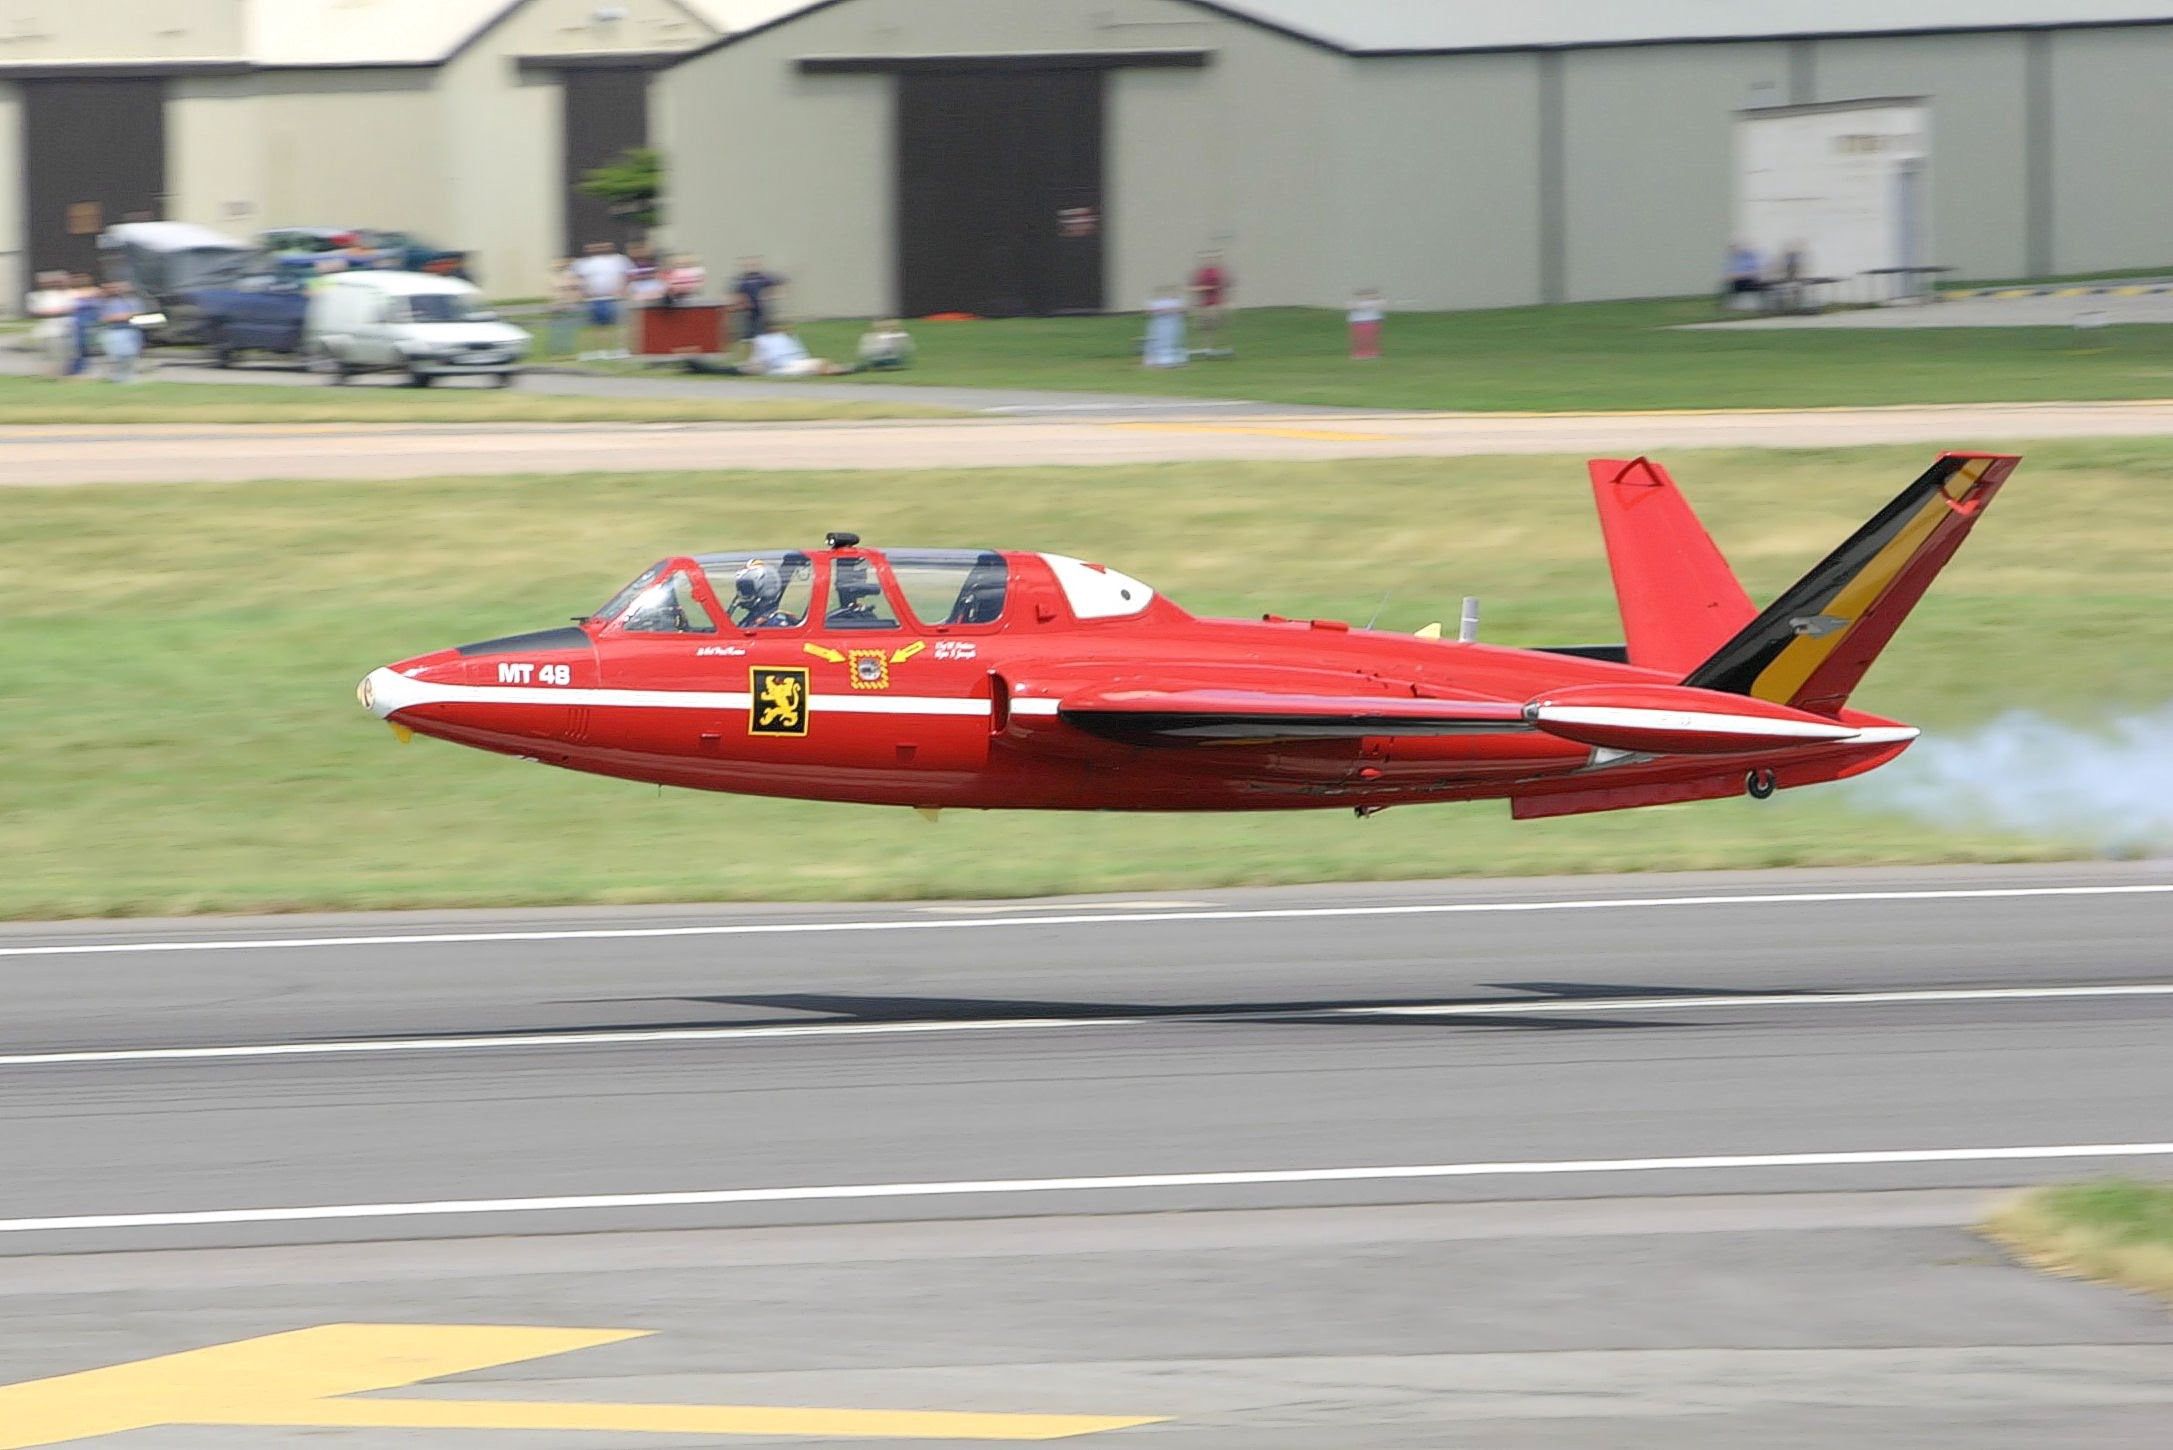 An image of the Fouga Magister low fly by